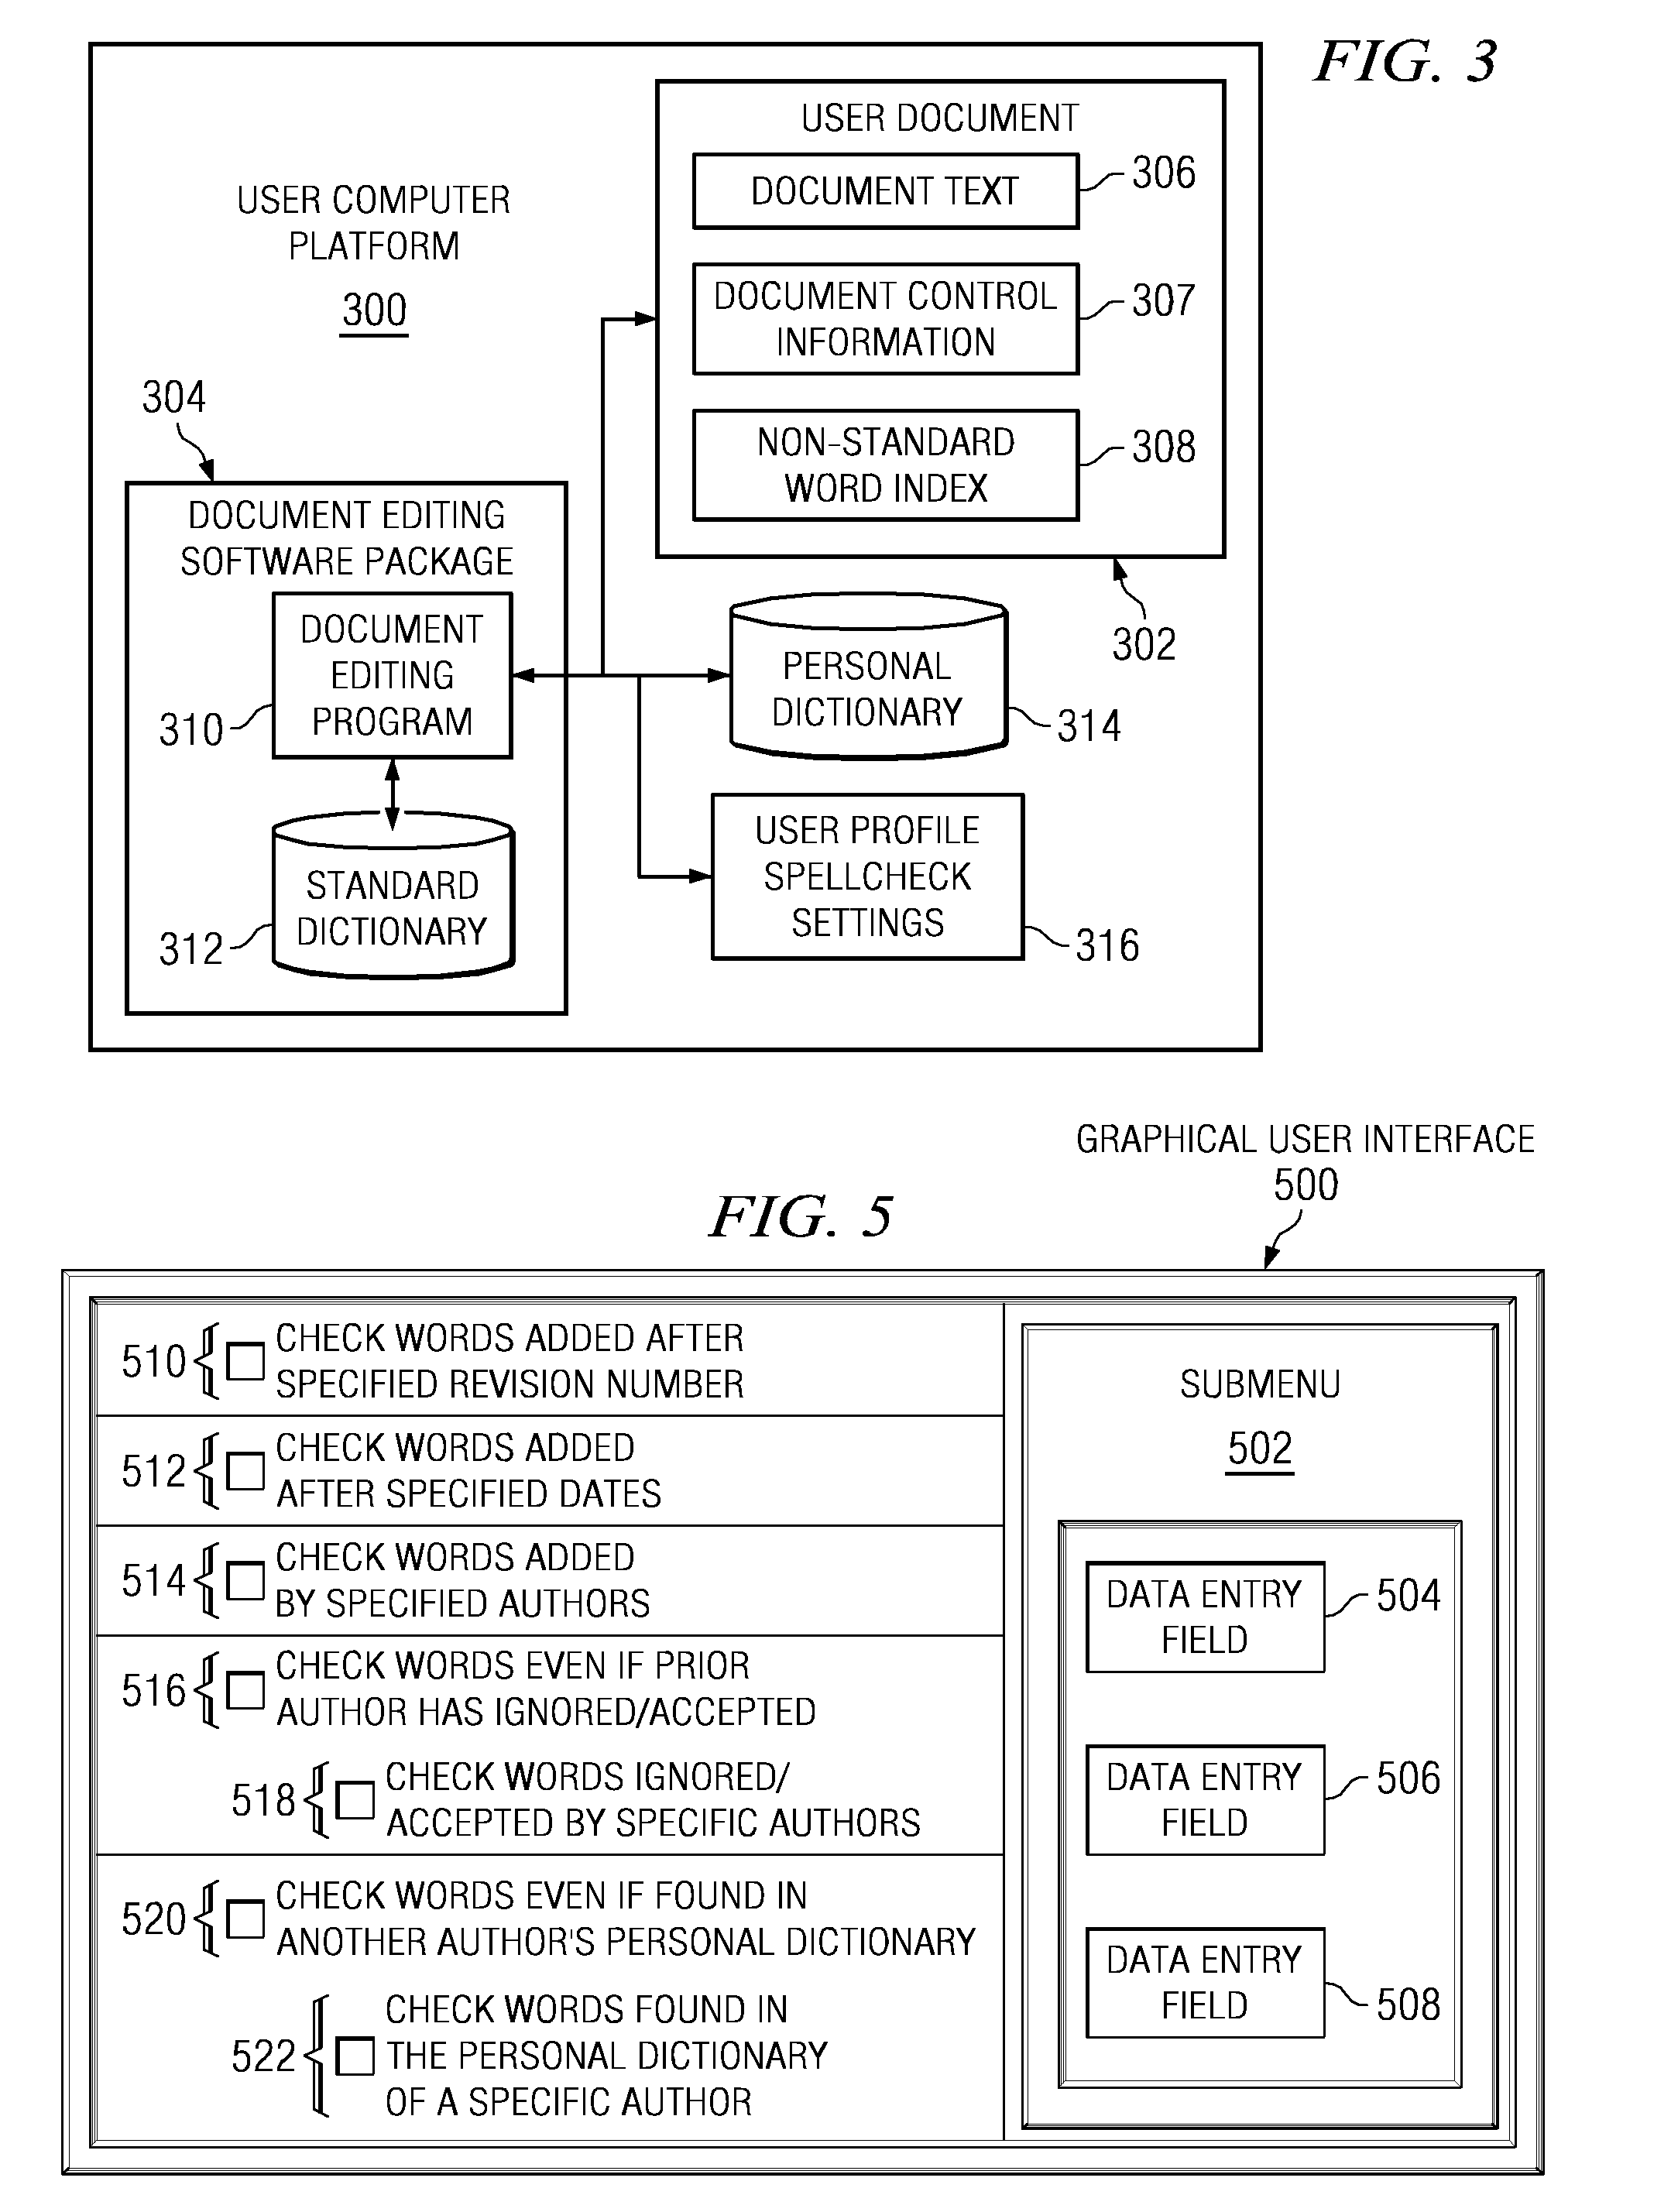 Method and apparatus for spellchecking electronic documents